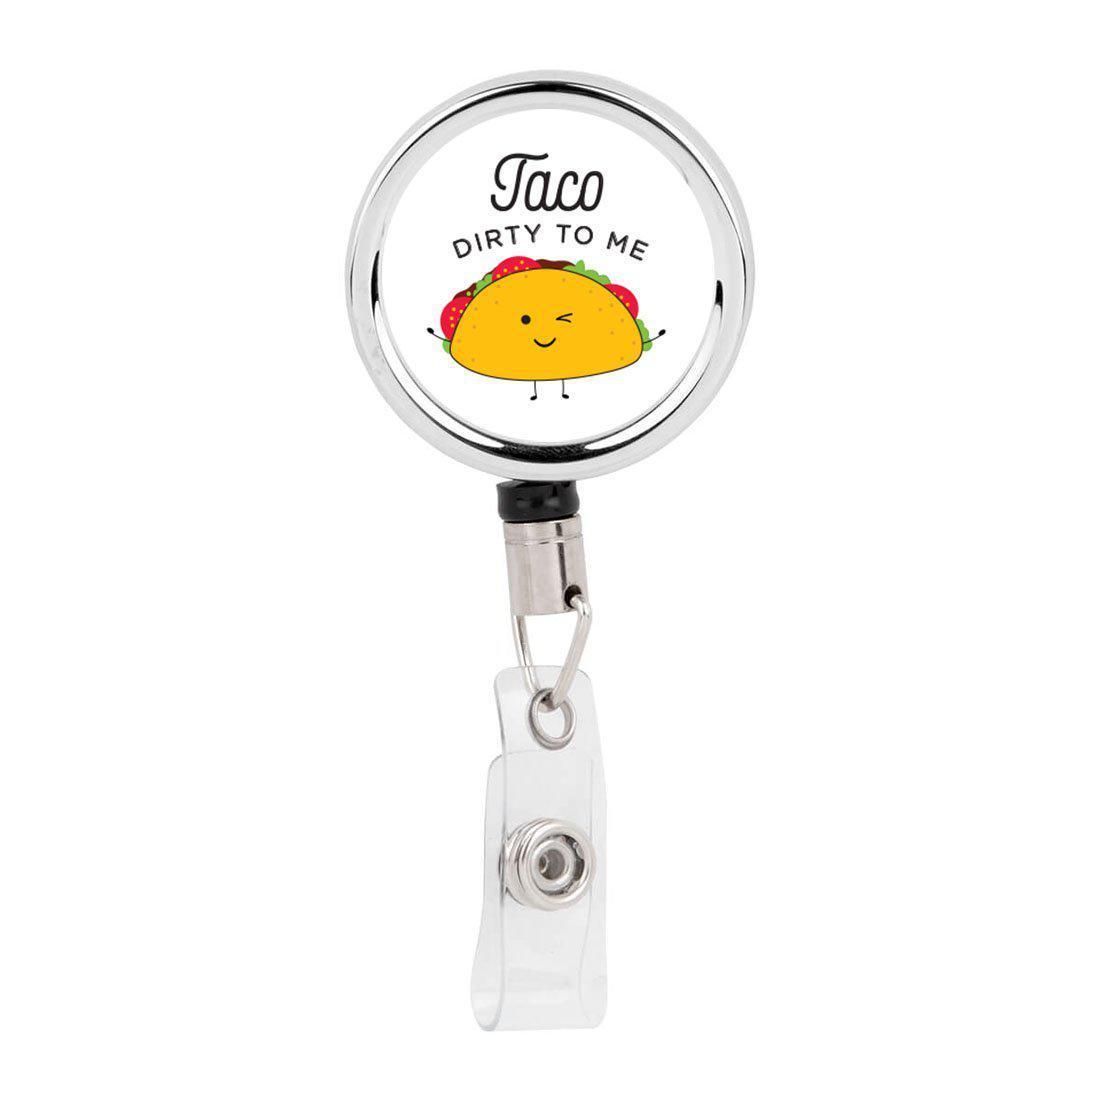 Andaz Press Retractable Badge Reel Holder with Clip, Taco Dirty to Me, Funny Food Pun Anime, Size: Large, White